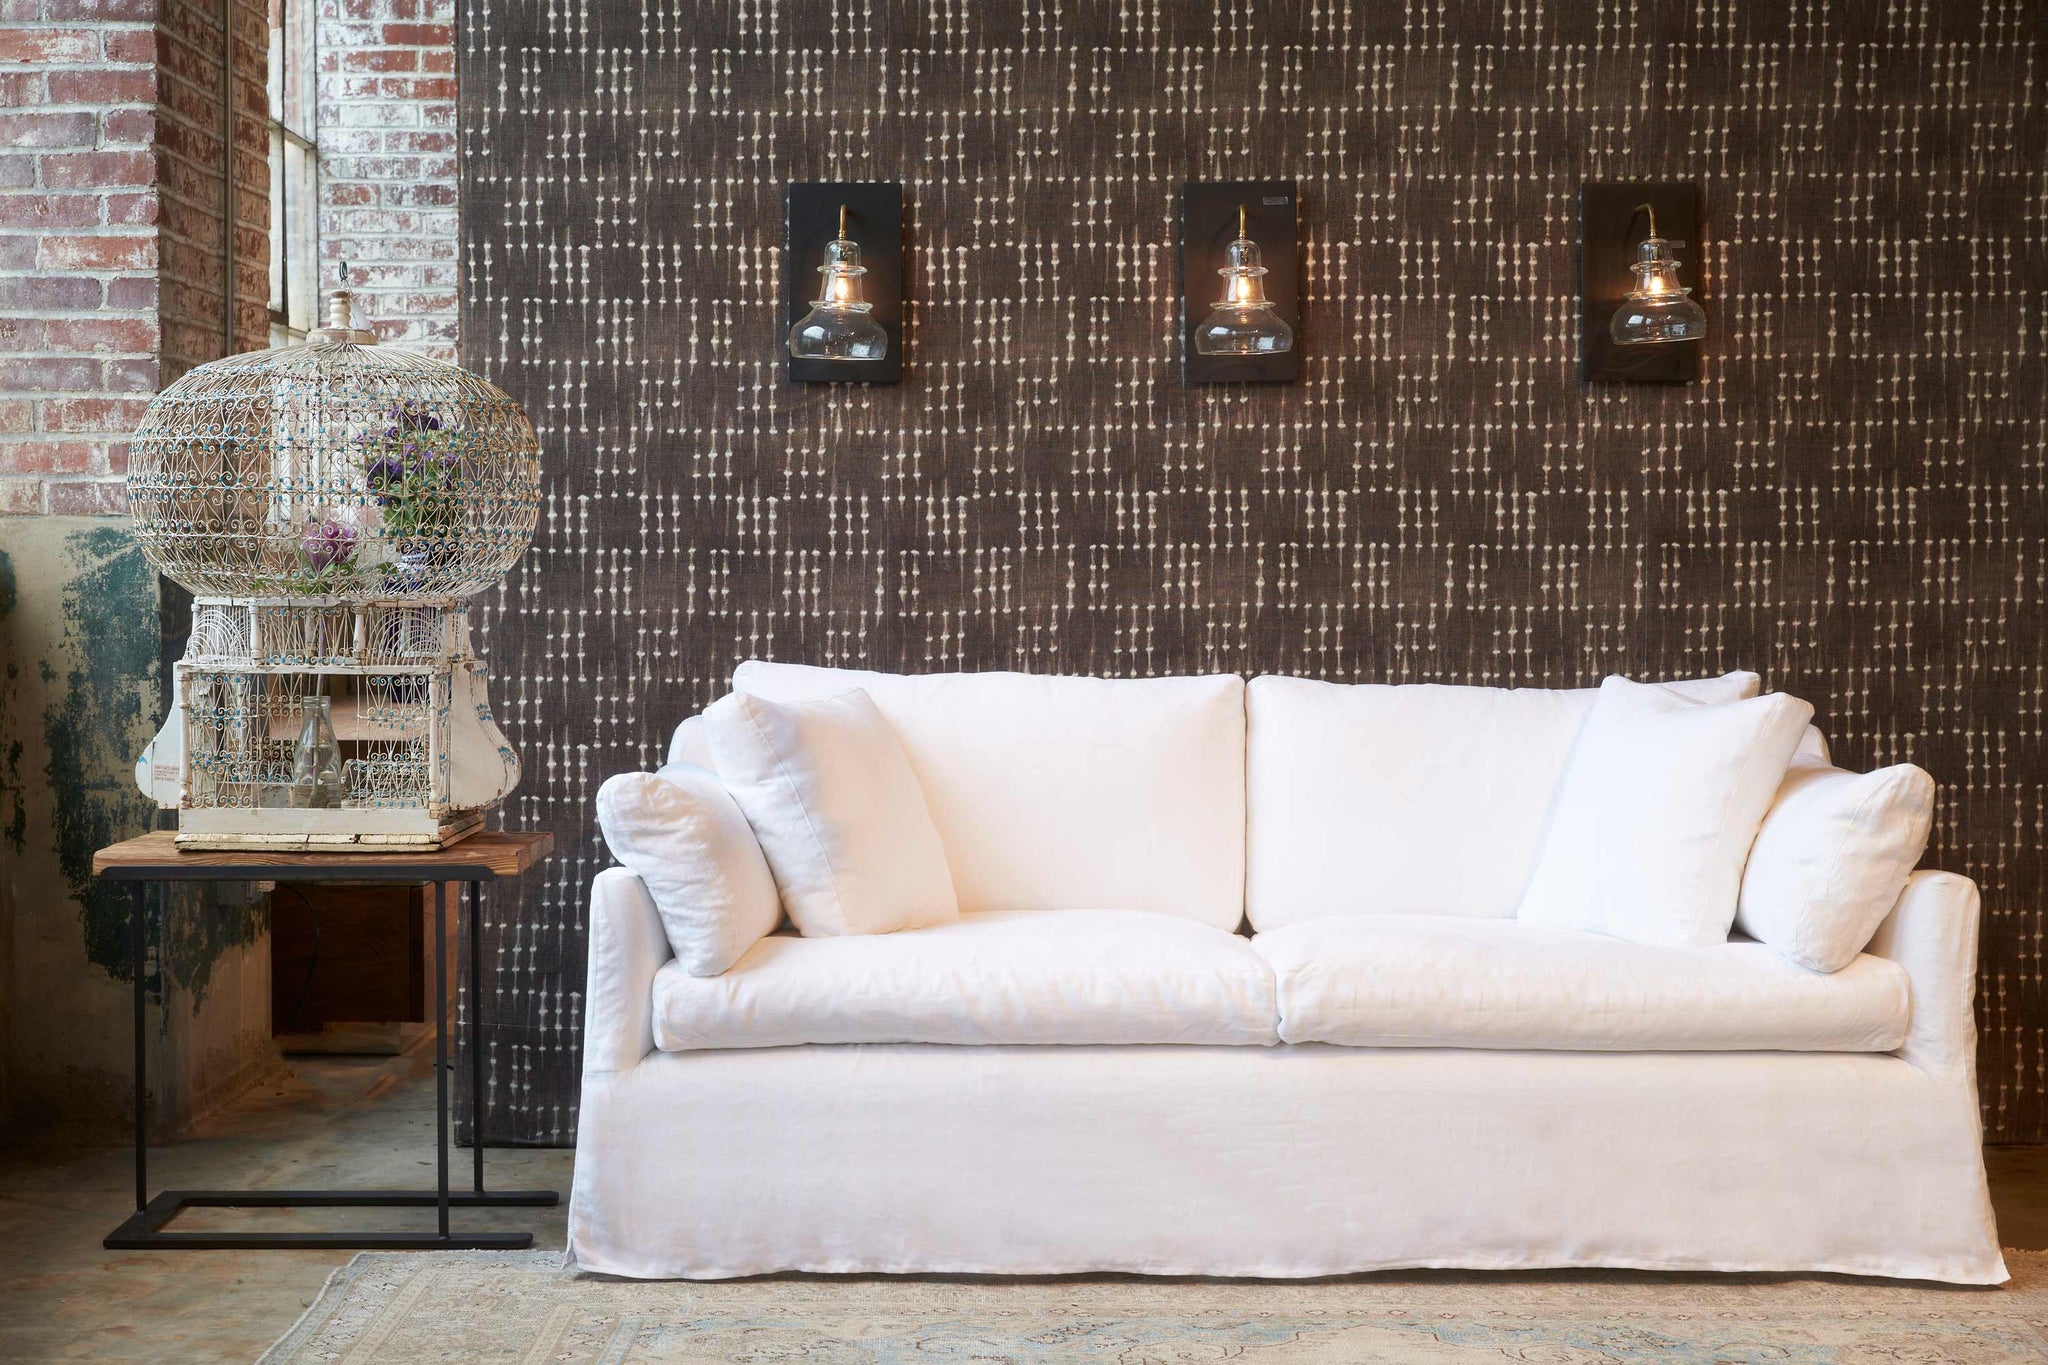  Lanister sofa in Otis White in front of a brown and white fabric wall. Three light sconces on the wall and a large vintage white birdcage is on the left. Photographed in Otis White. 